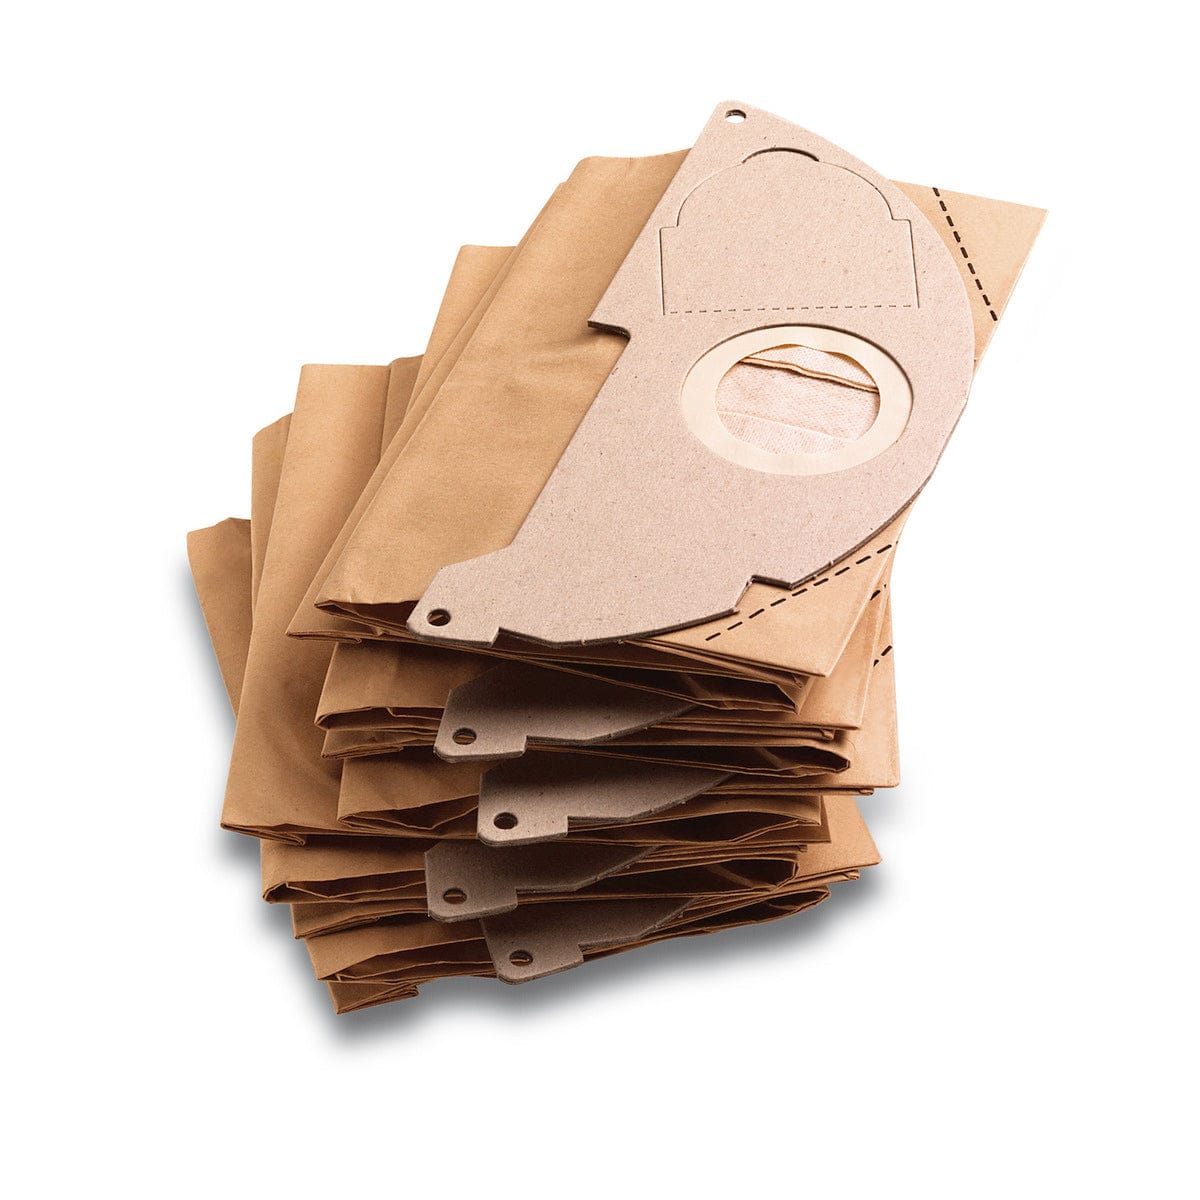 Karcher 5 Pieces Filter Bags Paper - WD 2 | Supply Master | Accra, Ghana Cleaning Equipment Accessories Buy Tools hardware Building materials